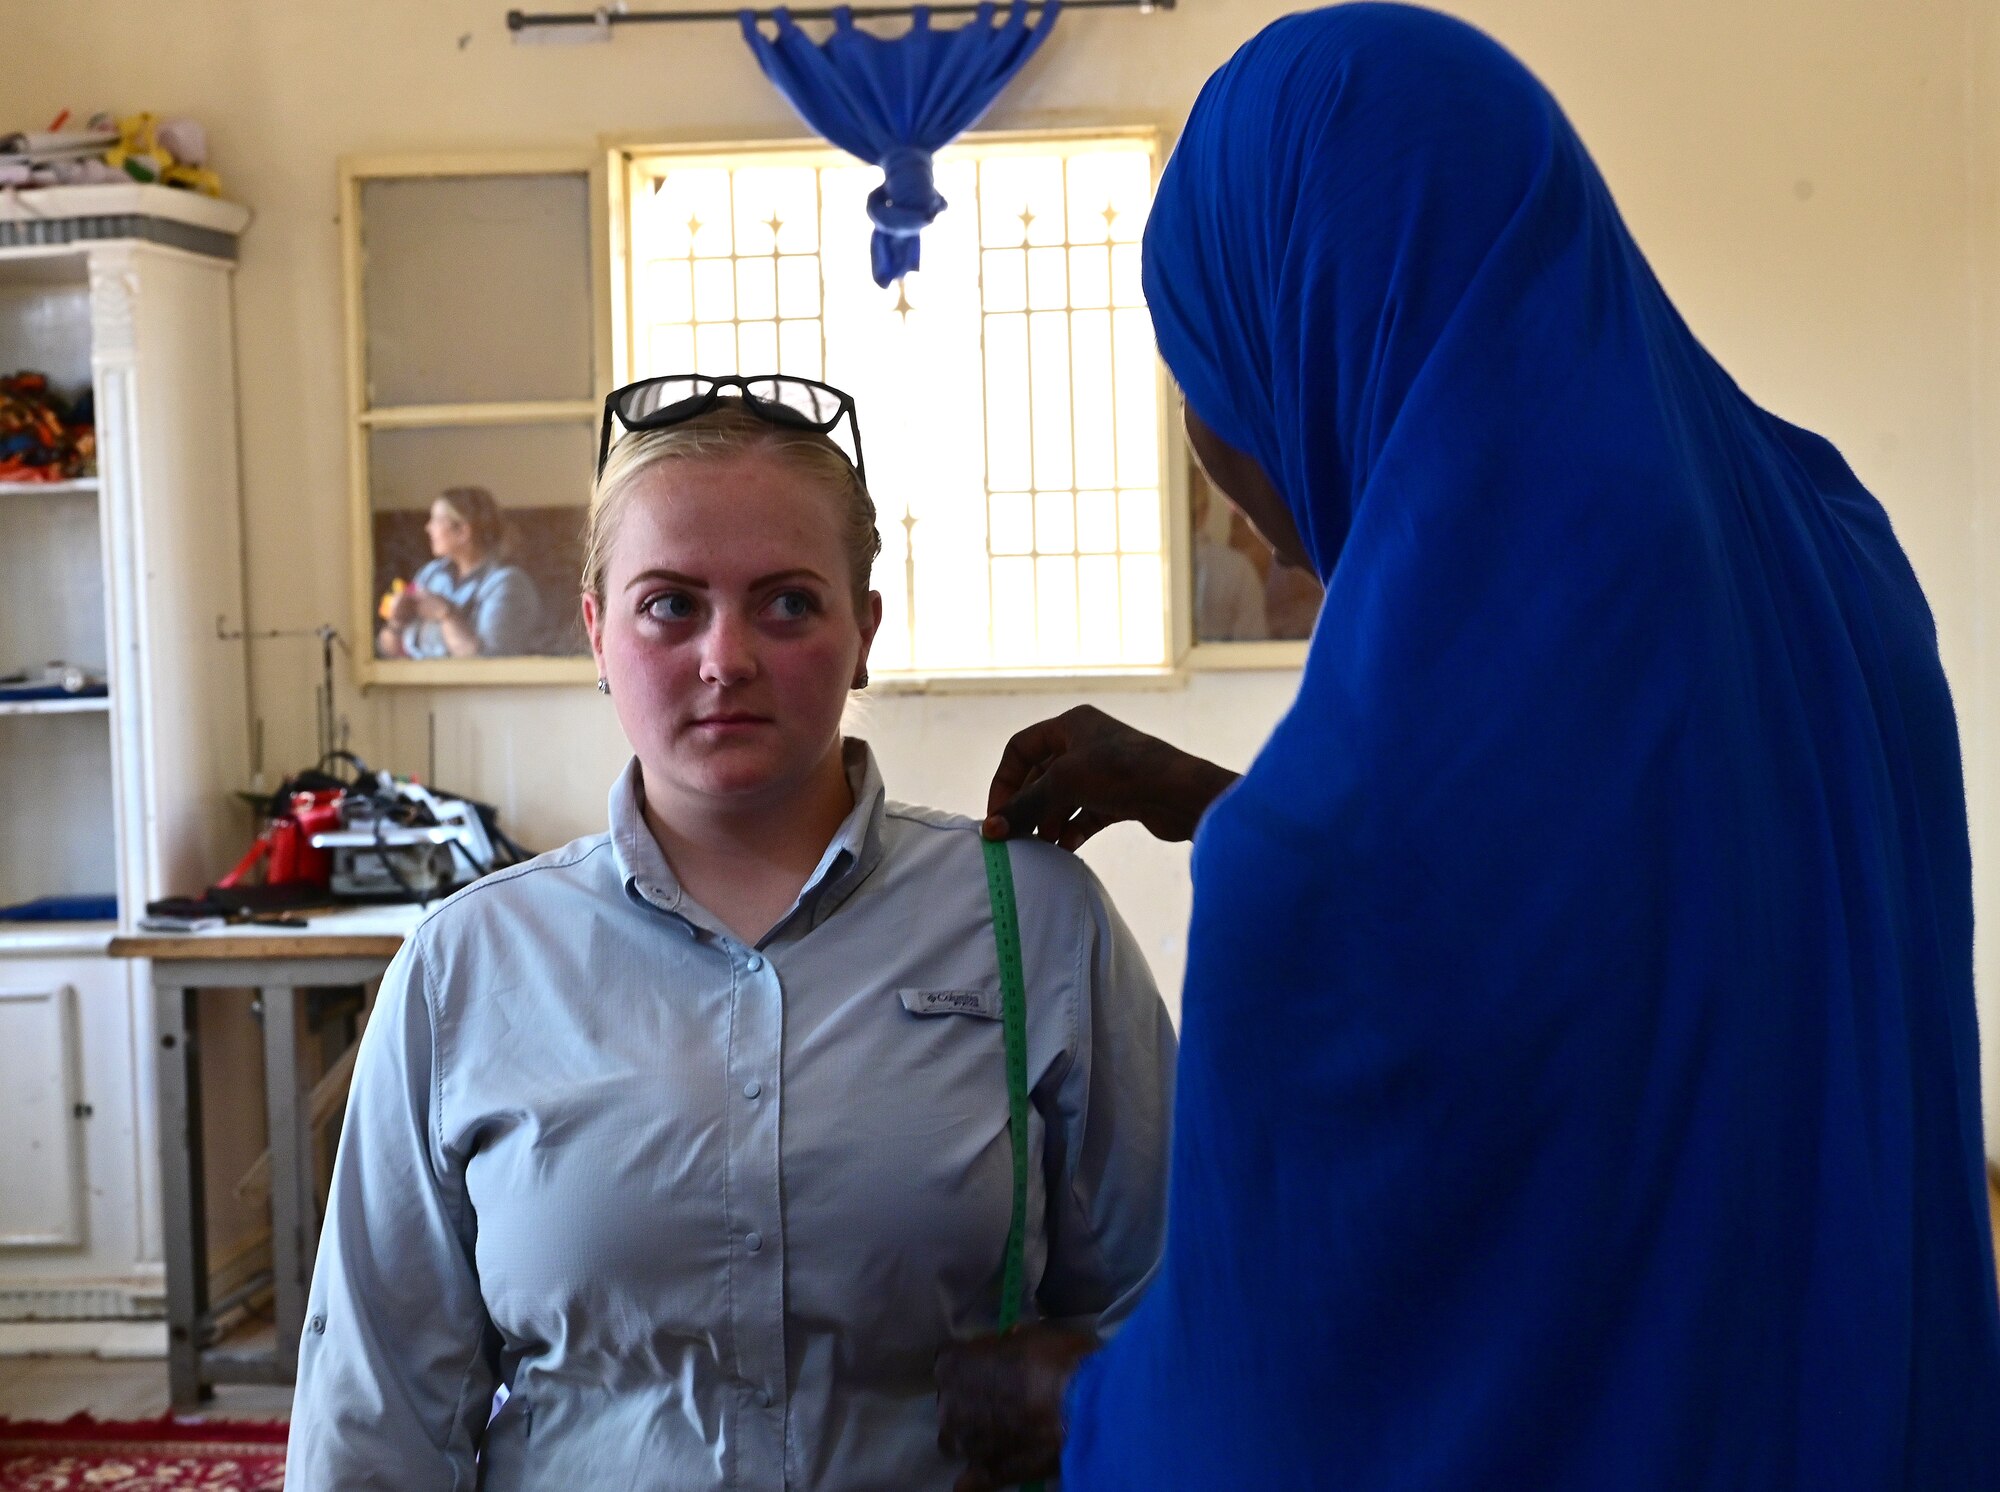 Airman 1st Class Brielee Lucero, Air Base 201 Women’s Association member, is fitted for a dress by a member of the Tedhilt Women’s Association during an International Women’s Day celebration in Agadez, Niger, March 6, 2022. Tedhilt Women’s Association offers a two-year program, which teaches women how to use a sewing machine and build a business to become financially secure. AB 201 Women’s Association supported the Tedhilt Women’s Association by purchasing approximately 250,000 West African CFA francs ($420 USD) of handmade scarfs, ceramic sculptures, received henna tattoos and commissioned four dresses. (U.S. Air Force photo by Tech. Sgt. Stephanie Longoria)